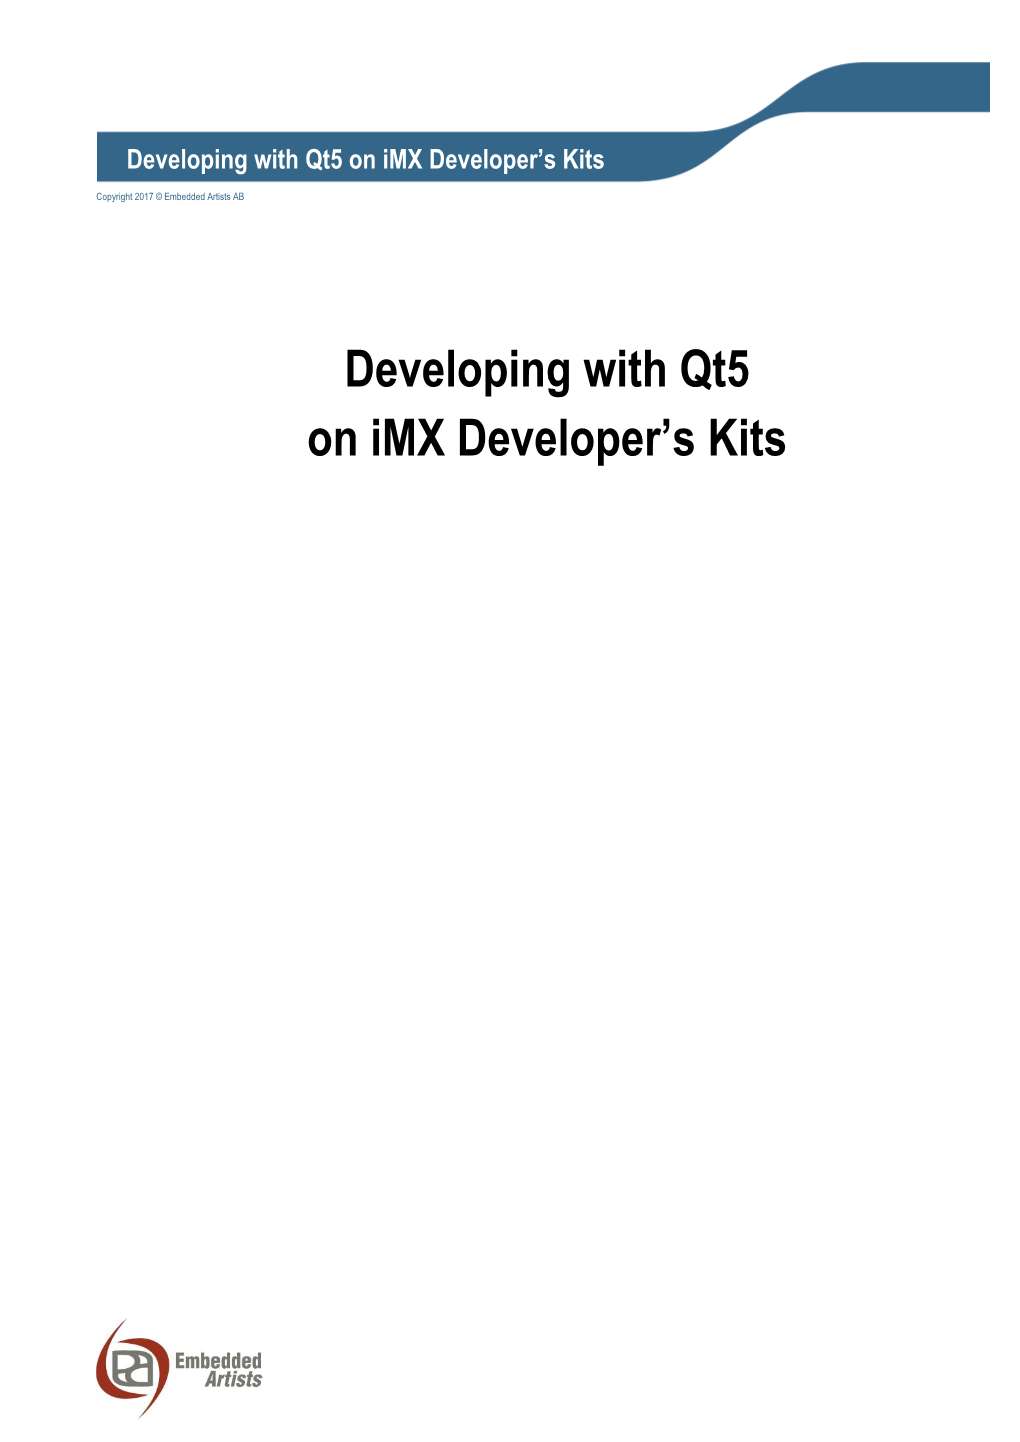 Developing with Qt5 on Imx Developer's Kits